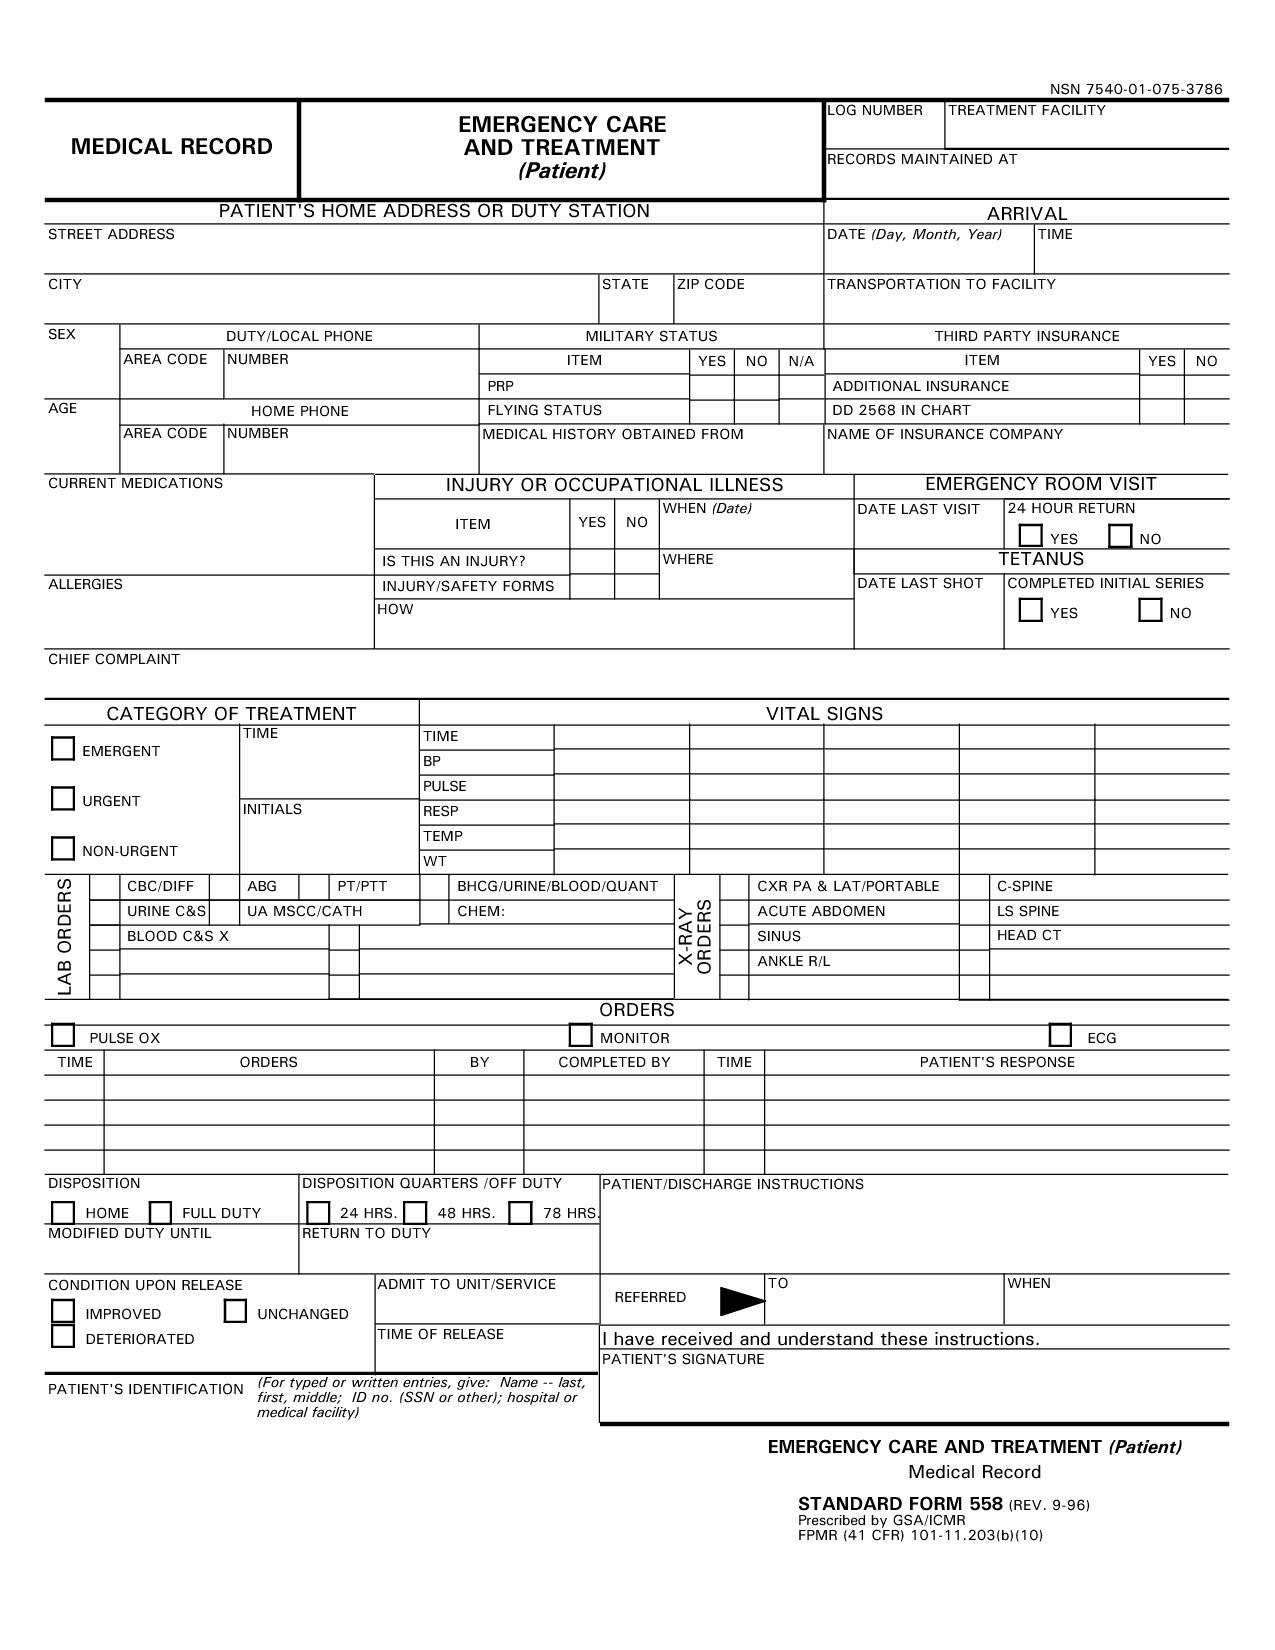 Medical Records form Template Best Of Medical Record Templates